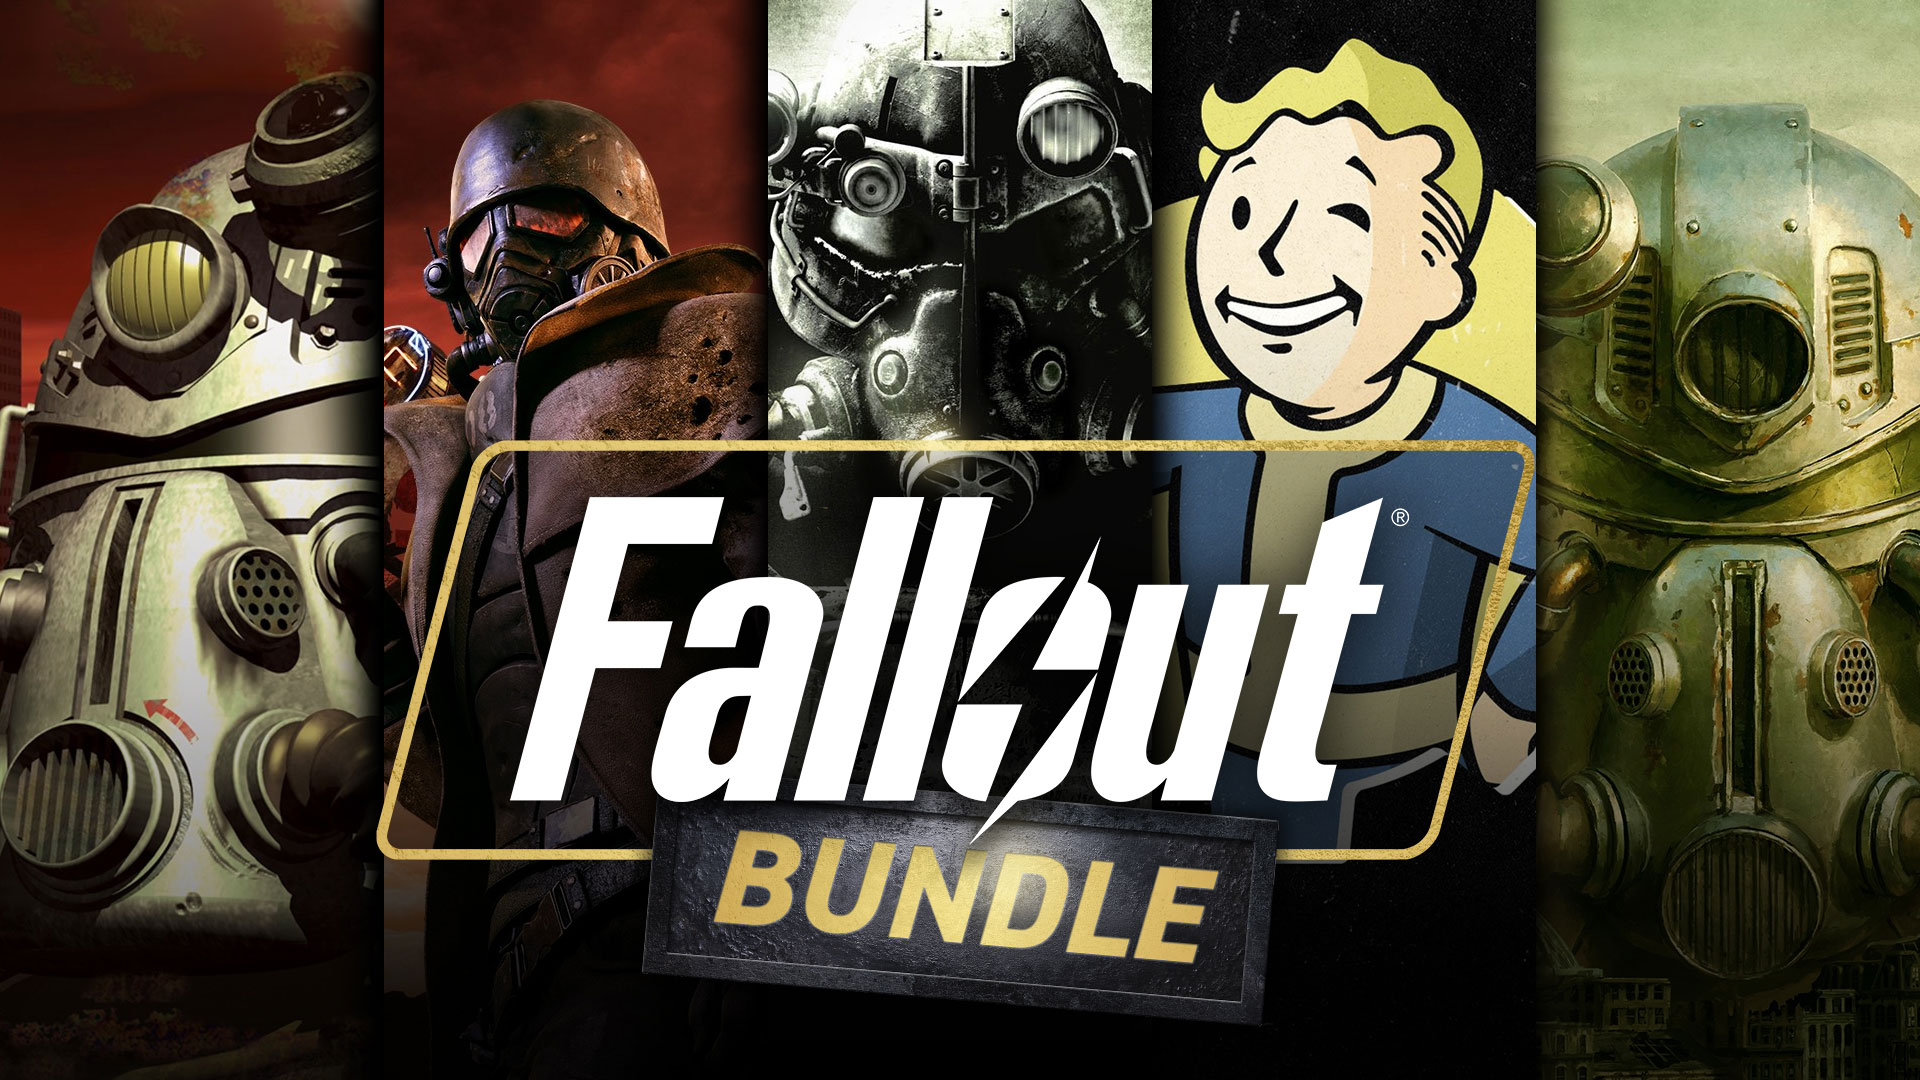 The Fallout Bundle is available for $24.99